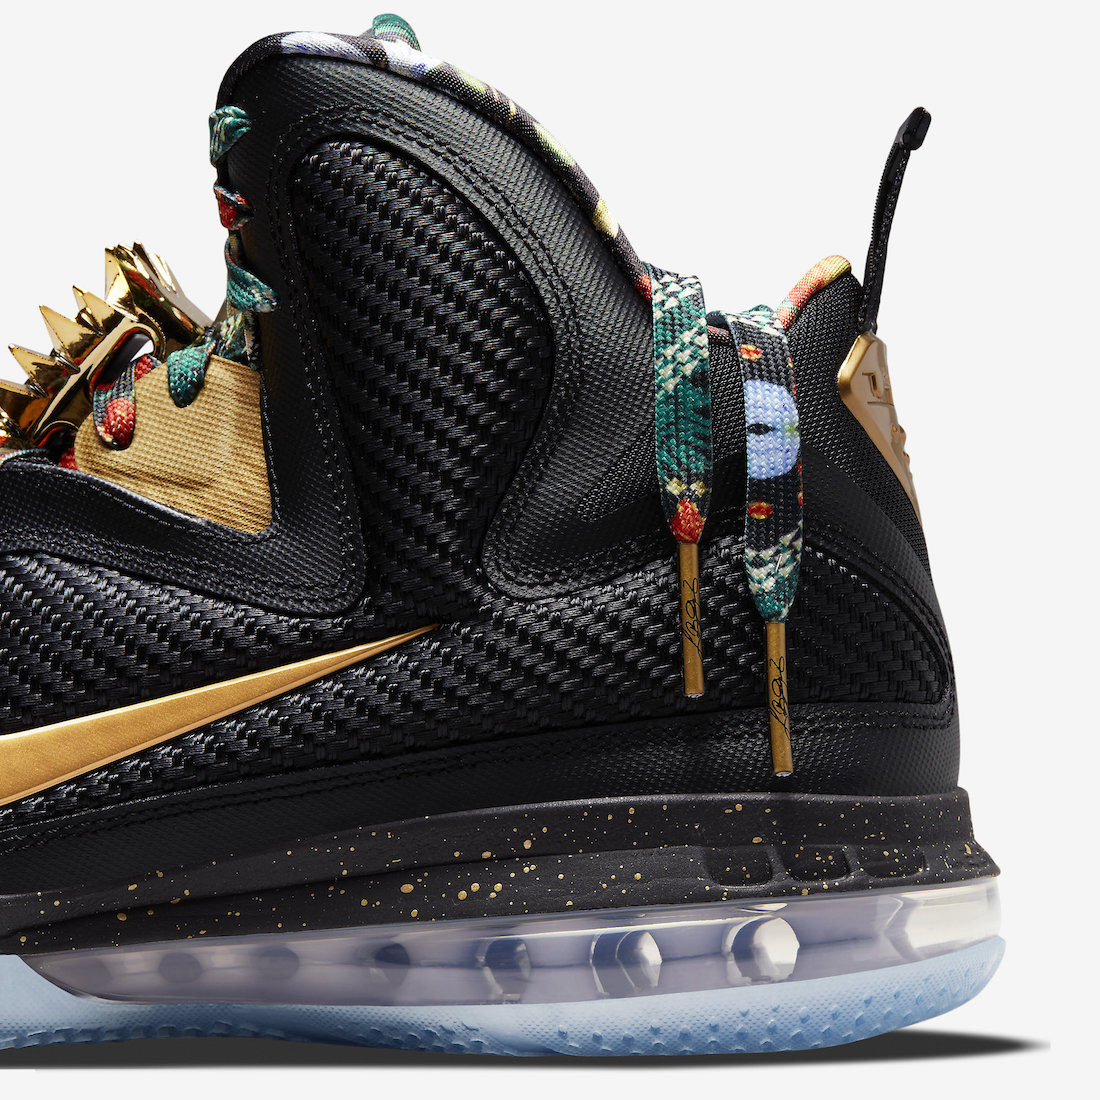 Nike-LeBron-9-Watch-The-Throne-DO9353-001-Release-Date-9